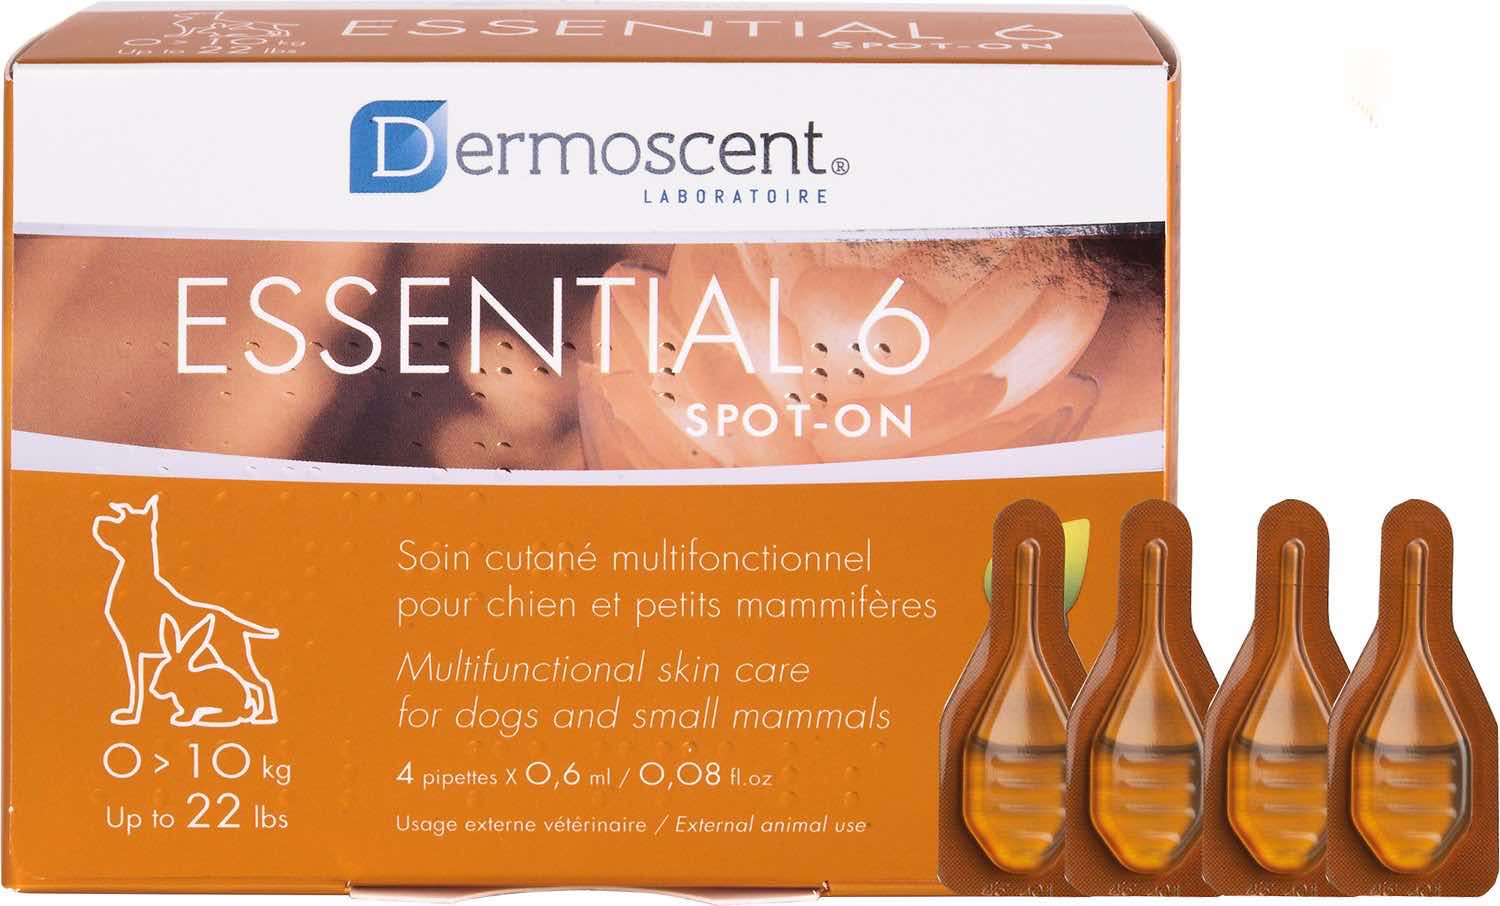 Essential 6 Spot-On for Dogs 4 x 0.08 oz (0.6 ml) pipettes up to 22 lbs 1